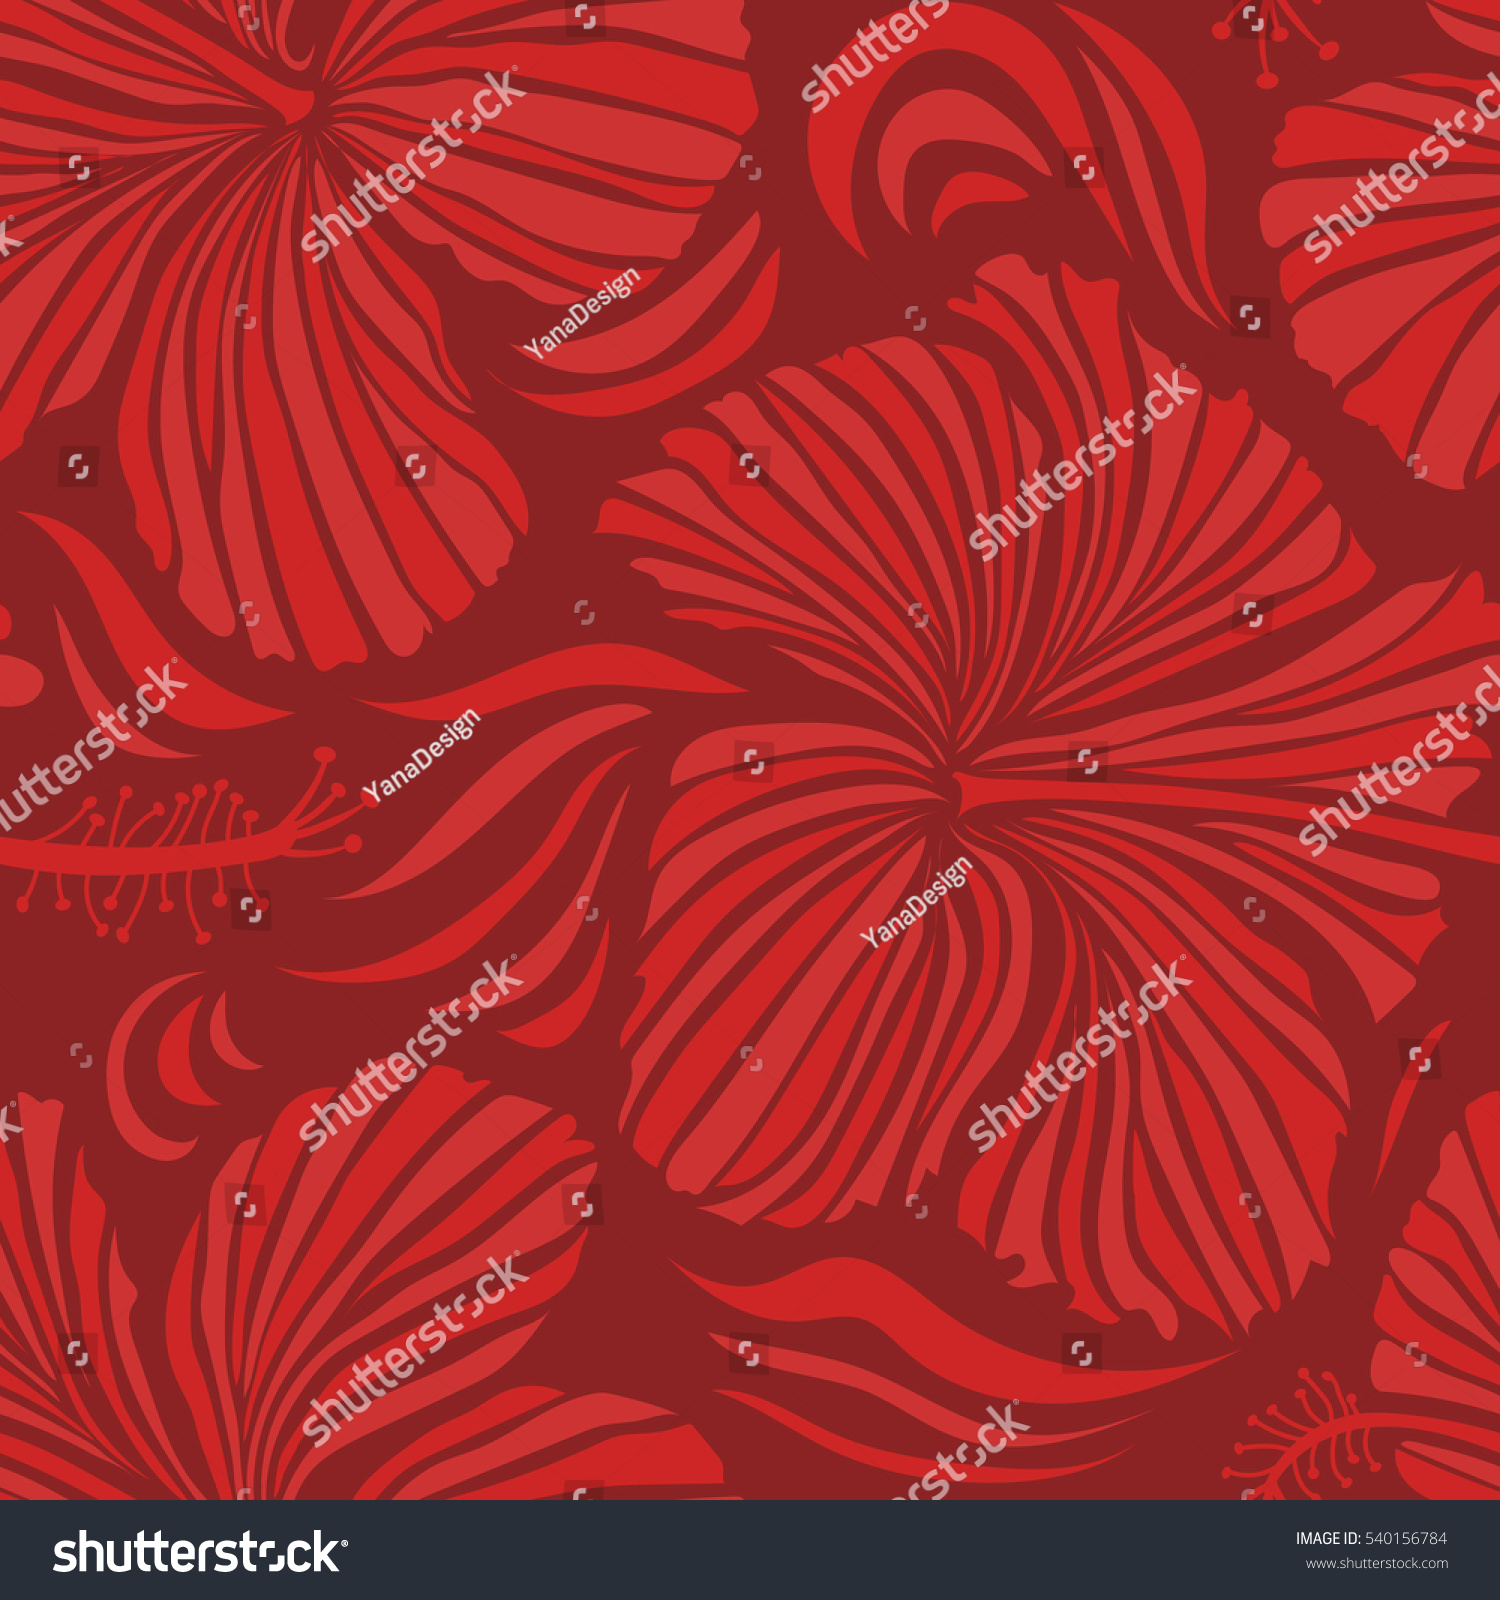 SVG of Aloha Hawaii, Luau Party invitation with red and orange hibiscus flowers. Aloha T-Shirt design. Best creative design for poster, flyer, presentation. Vector seamless pattern. svg